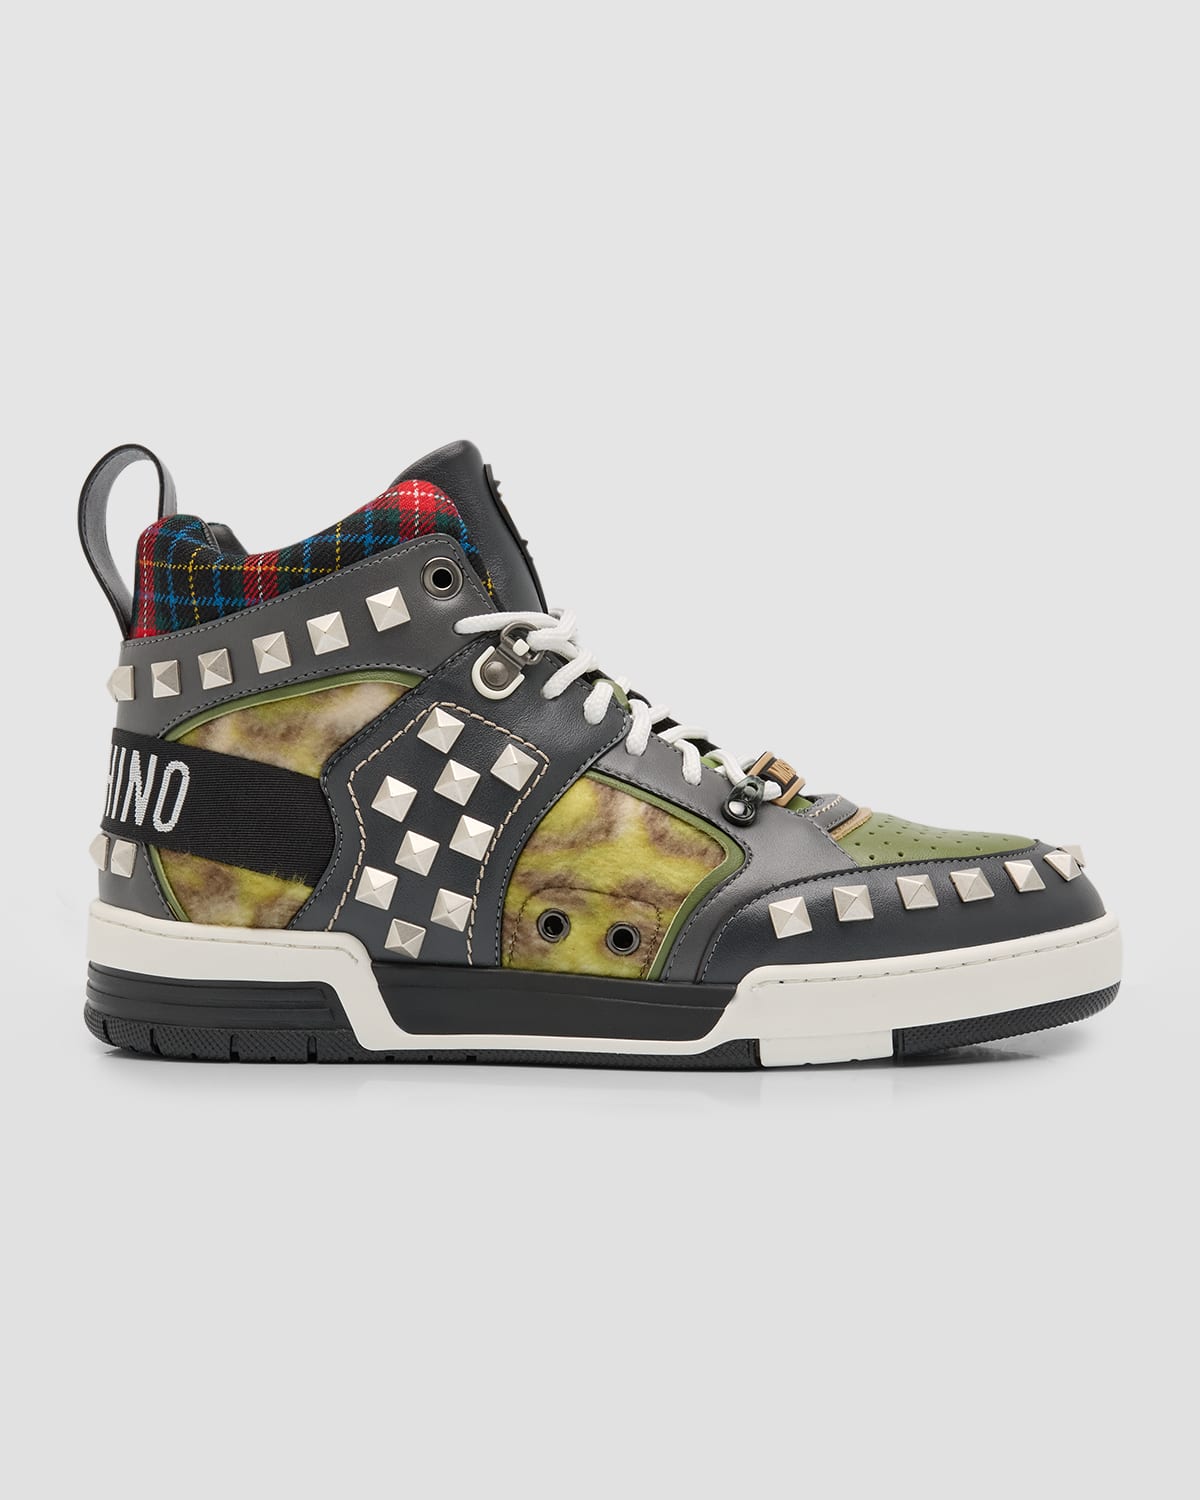 MOSCHINO SNAKESKIN HIGH-TOP SNEAKERS IN SNAKE MULTI